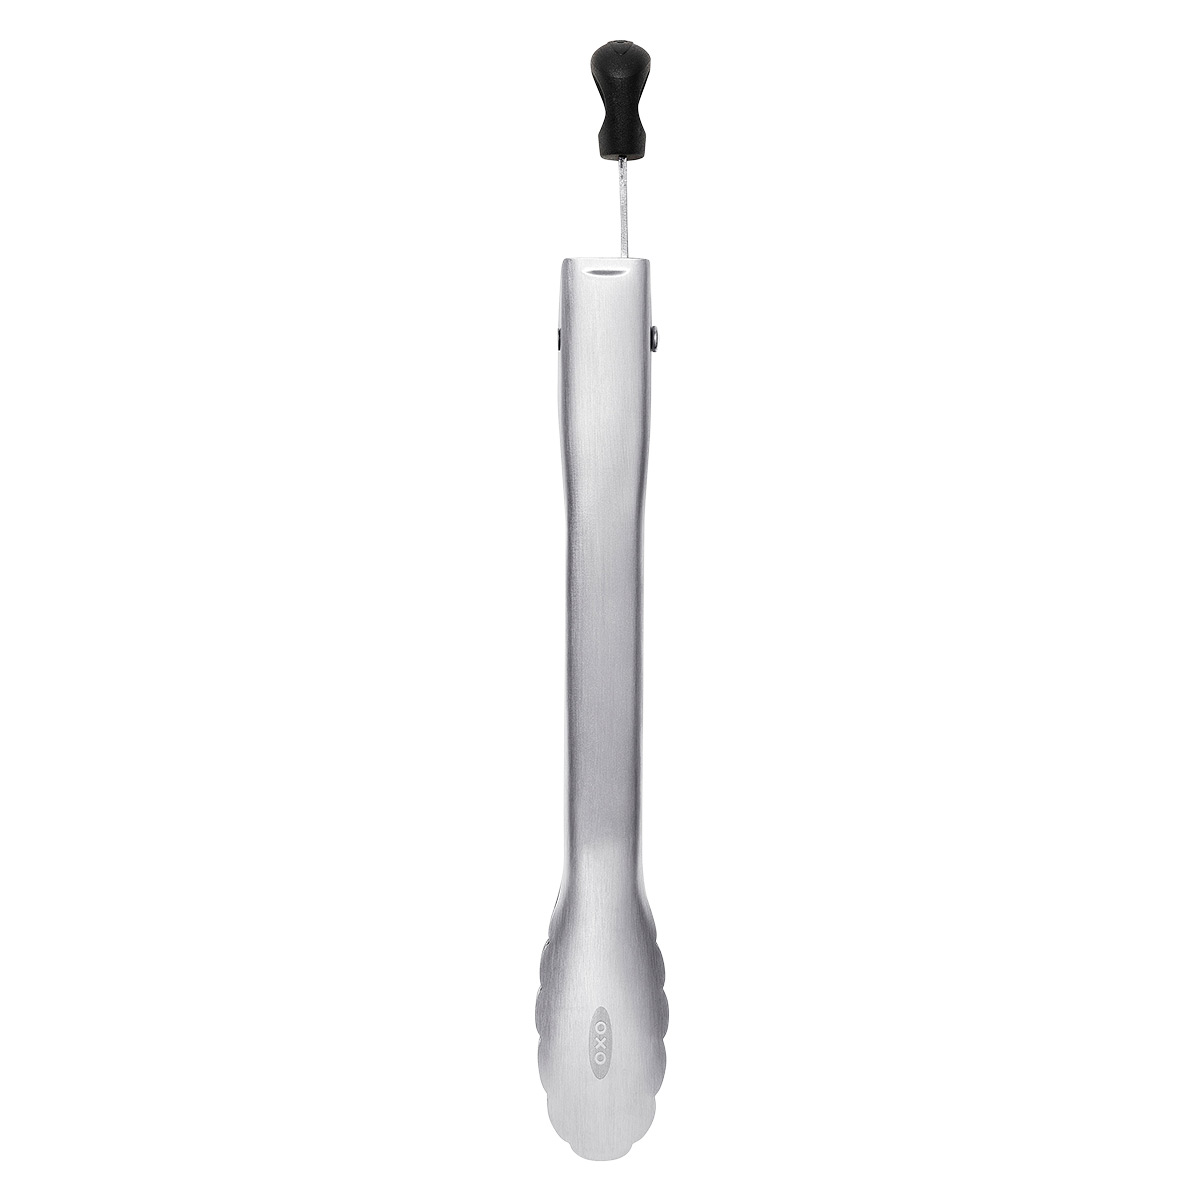 https://www.containerstore.com/catalogimages/394613/10082368-OXO-Mini-Tongs-VEN2.jpg